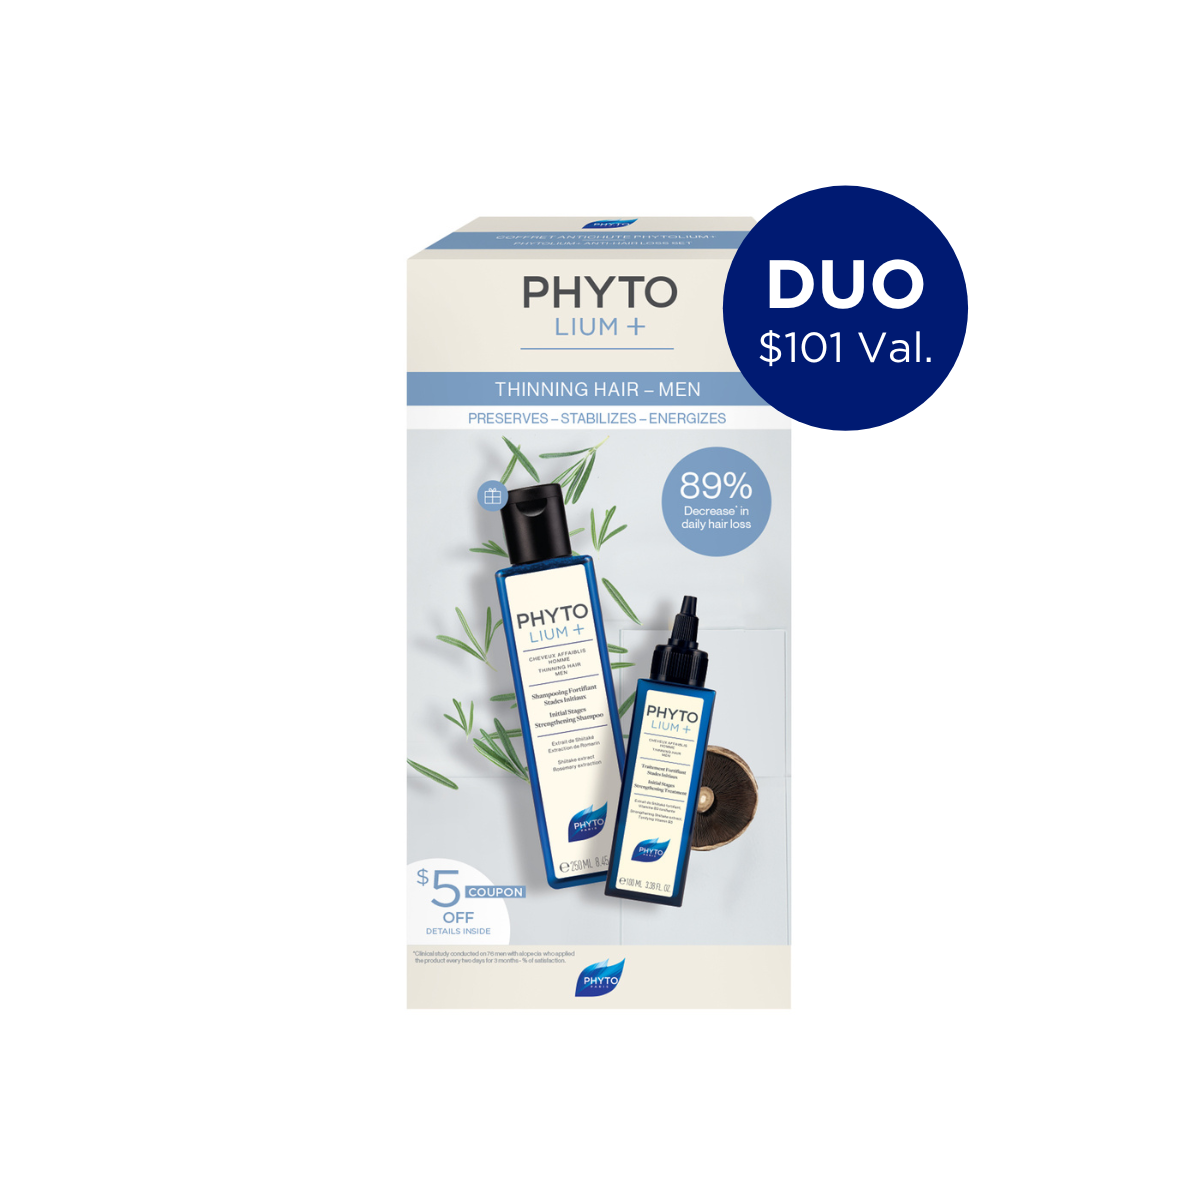 PHYTOLIUM+ Initial Stages Strengthening Duo